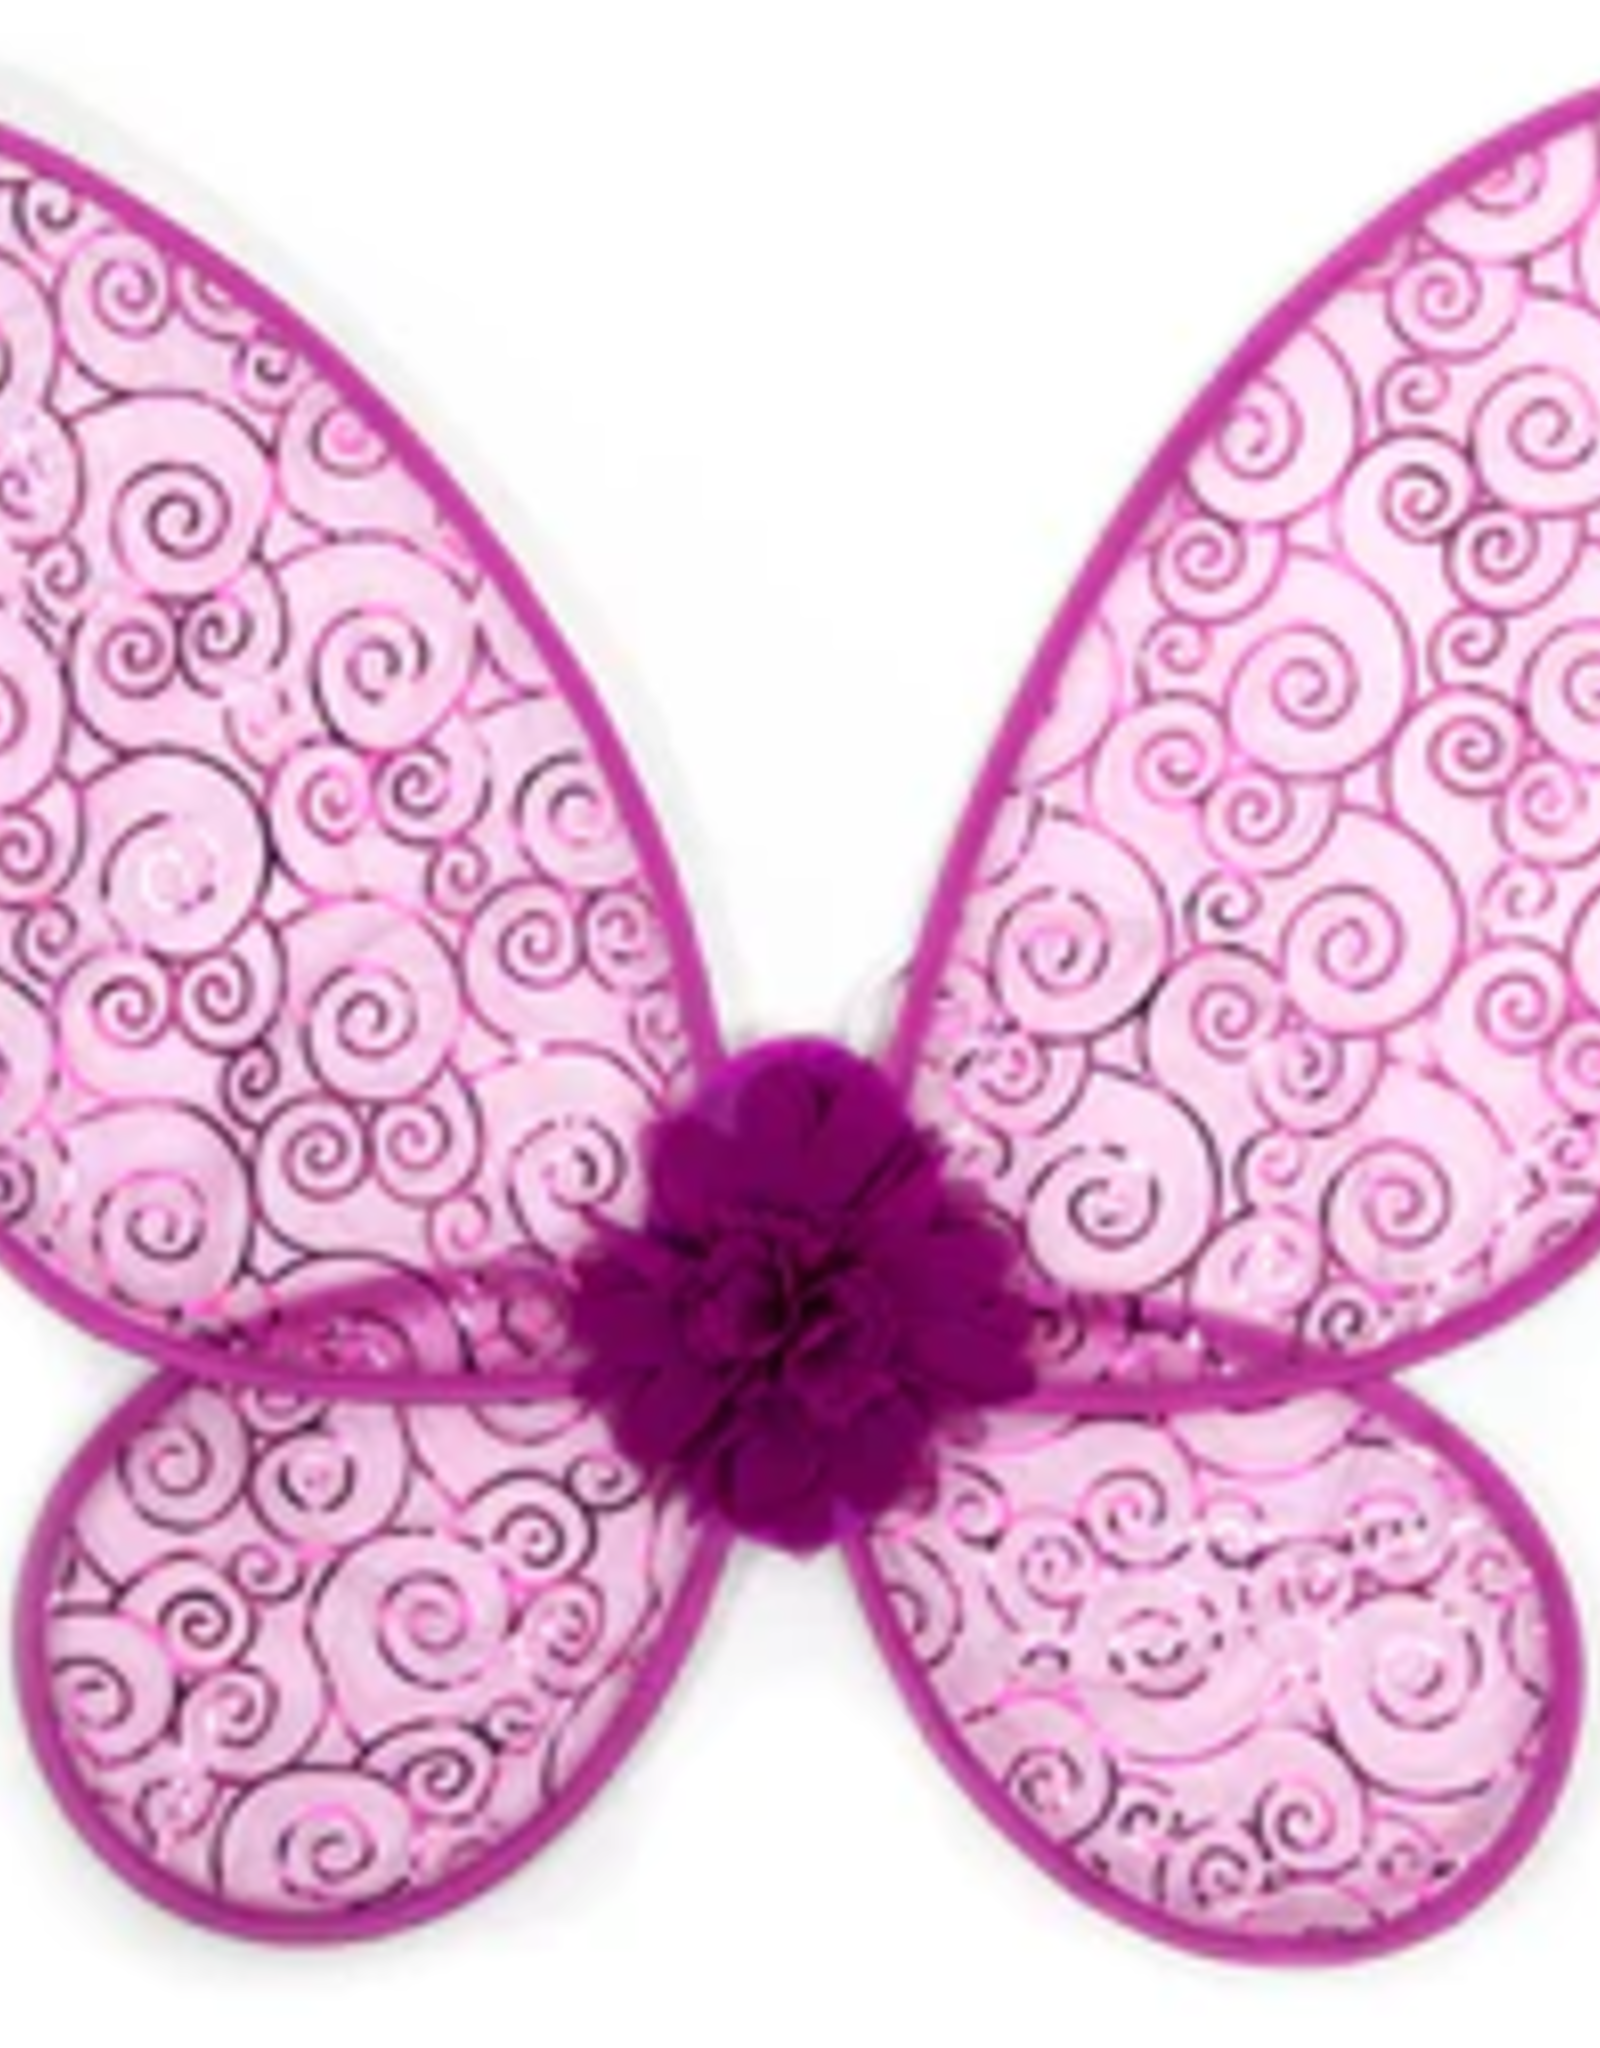 Little Adventures Purple Blossom Fairy Wings (Pg. 69)Ages 3+